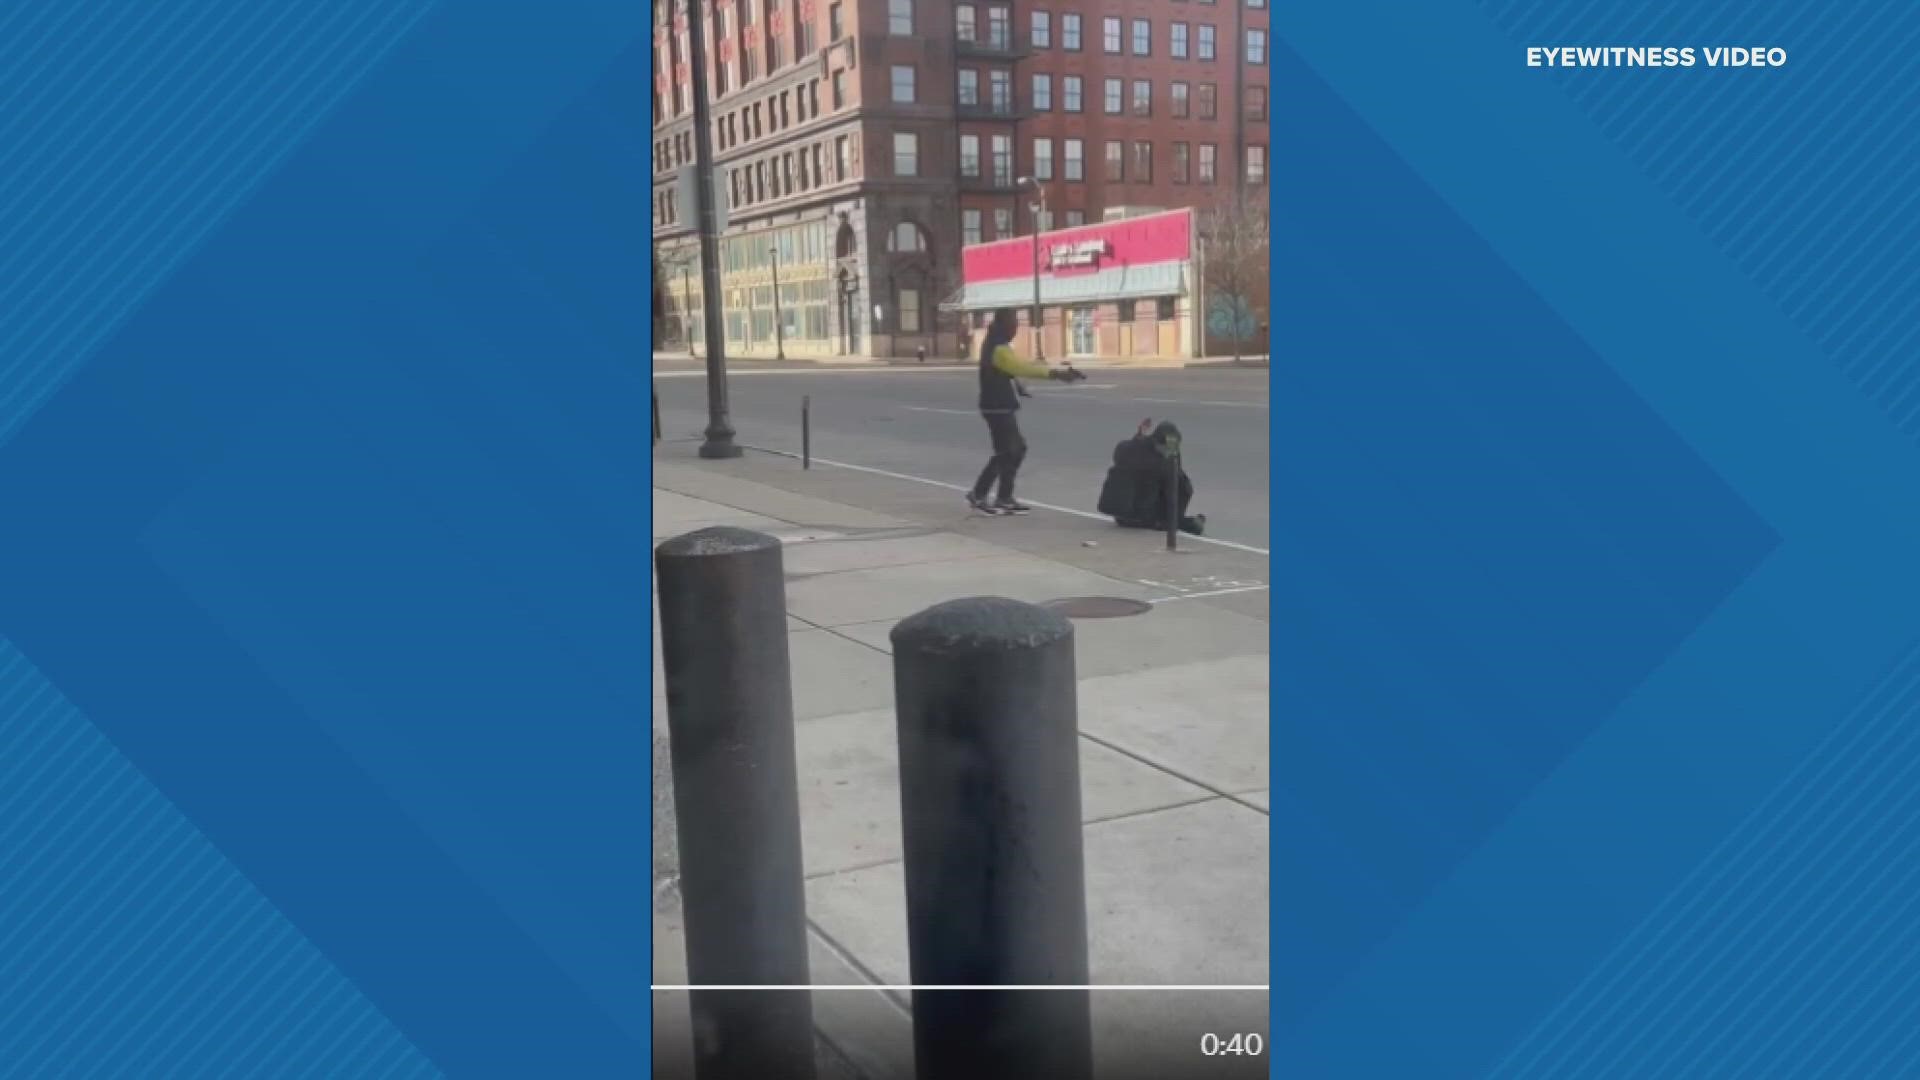 The latest downtown shooting left a man dealing with homelessness dead. It was all caught on video.